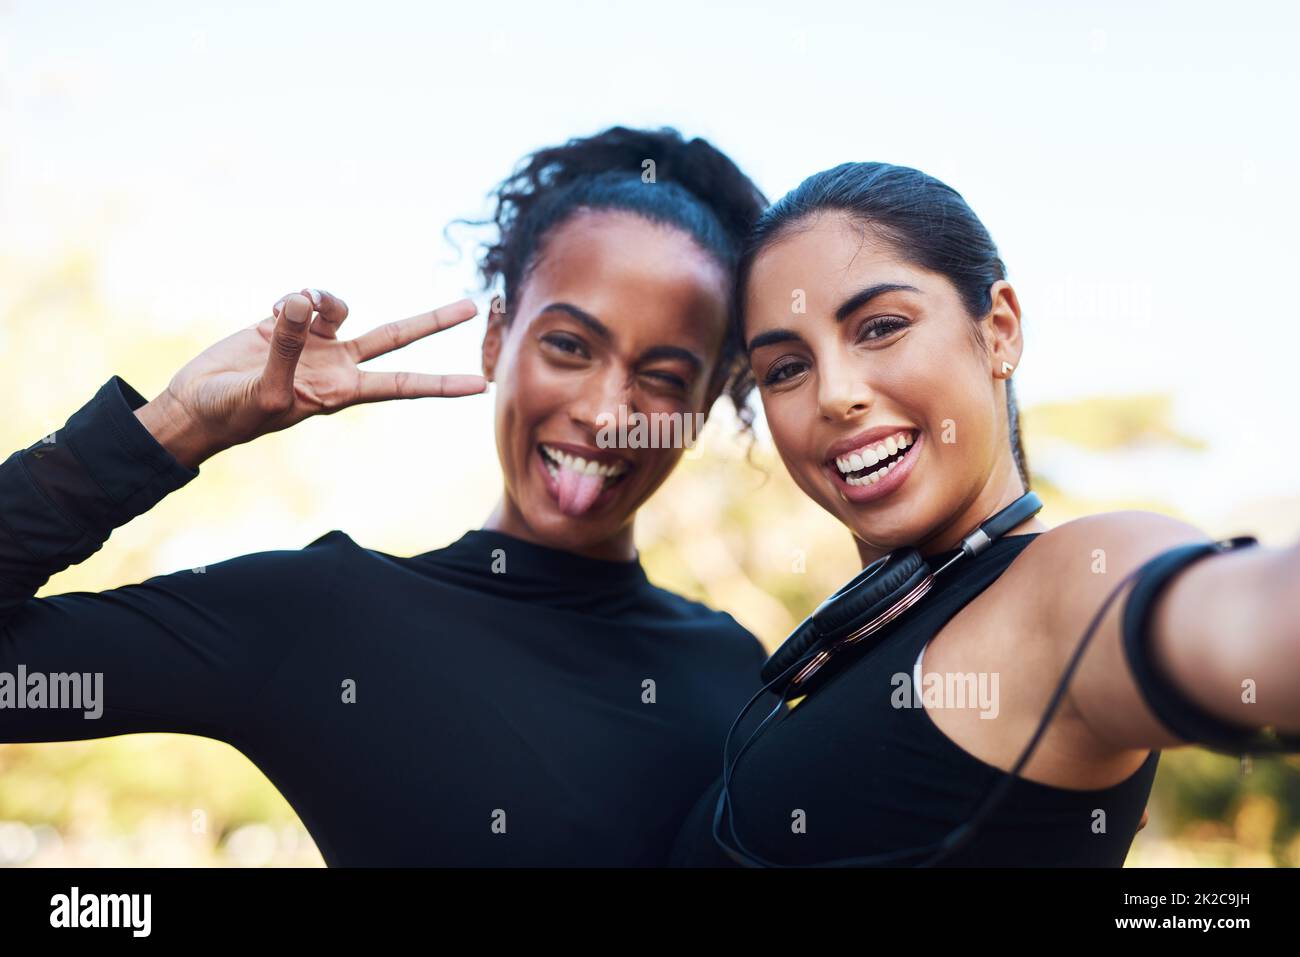 Selfie time. Cropped portrait of two attractive young women posing for a selfie after their run together in the park. Stock Photo